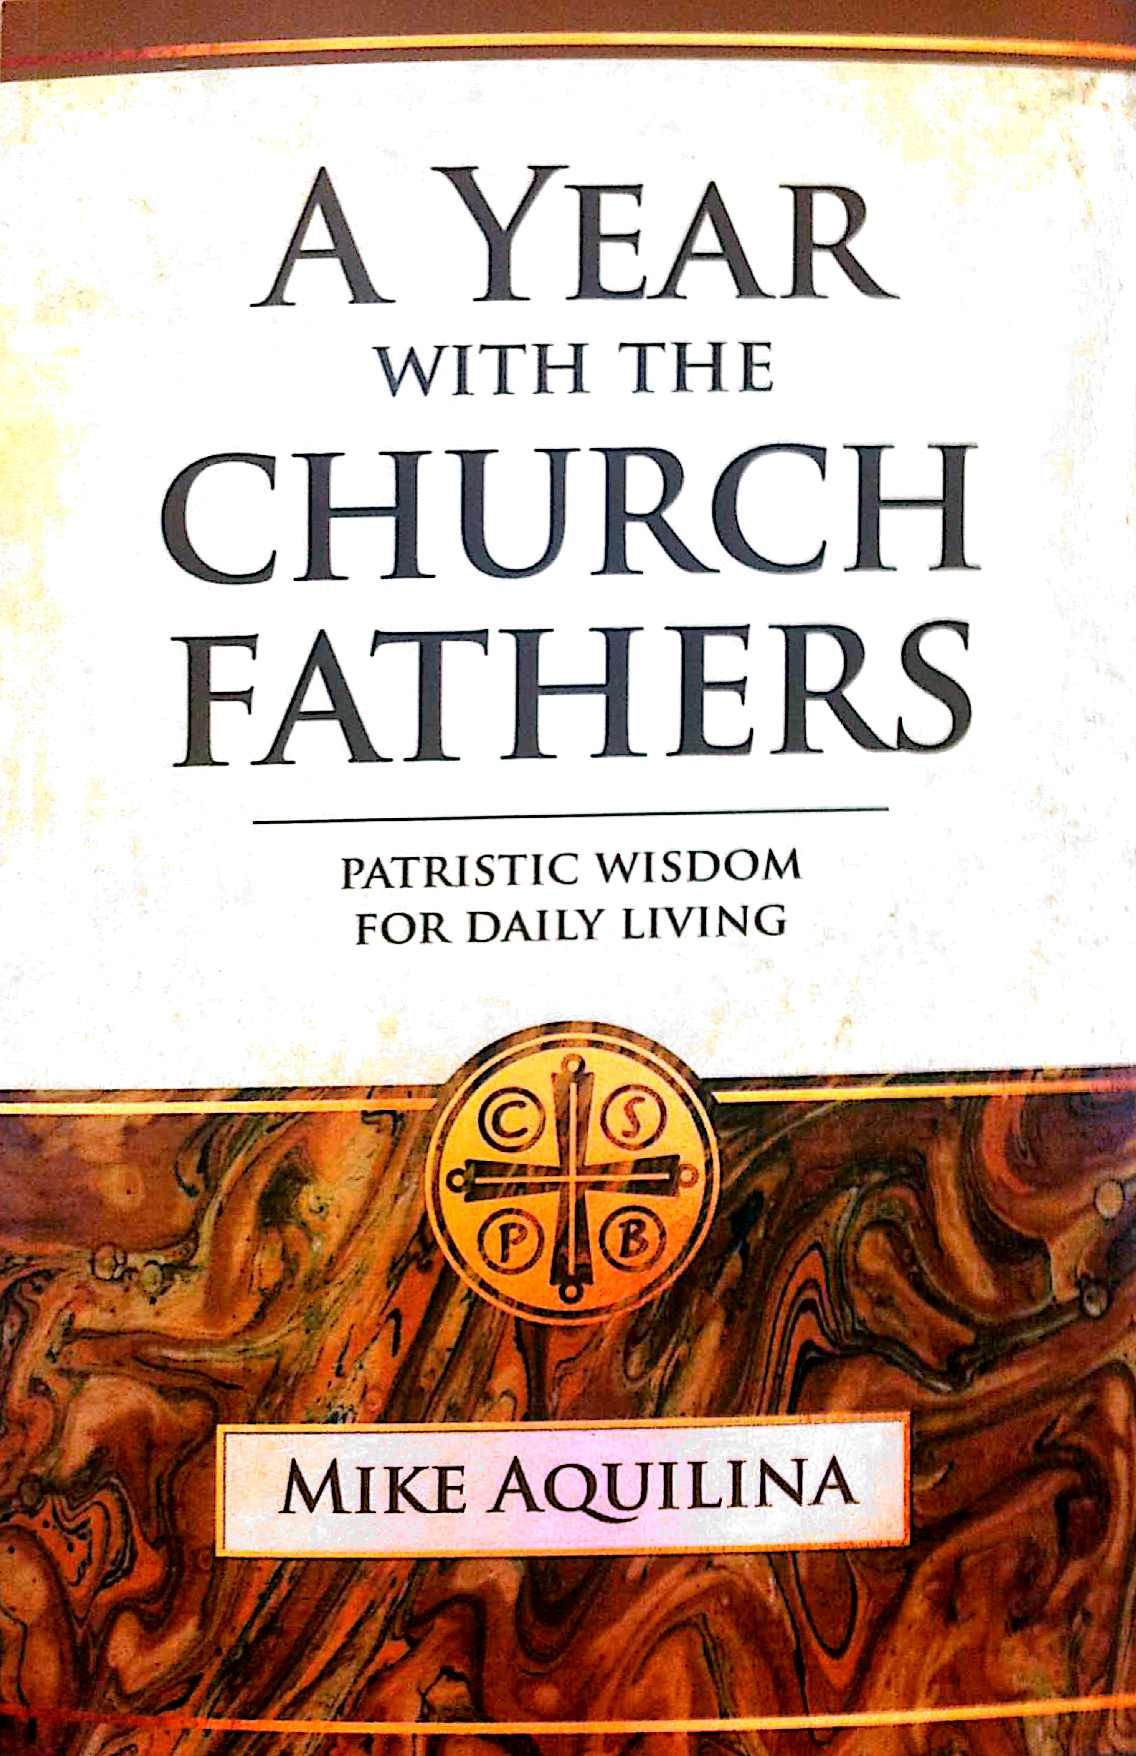 A Year with the Church Fathers: Patristic Wisdom for Daily Living / Mike Aquilina